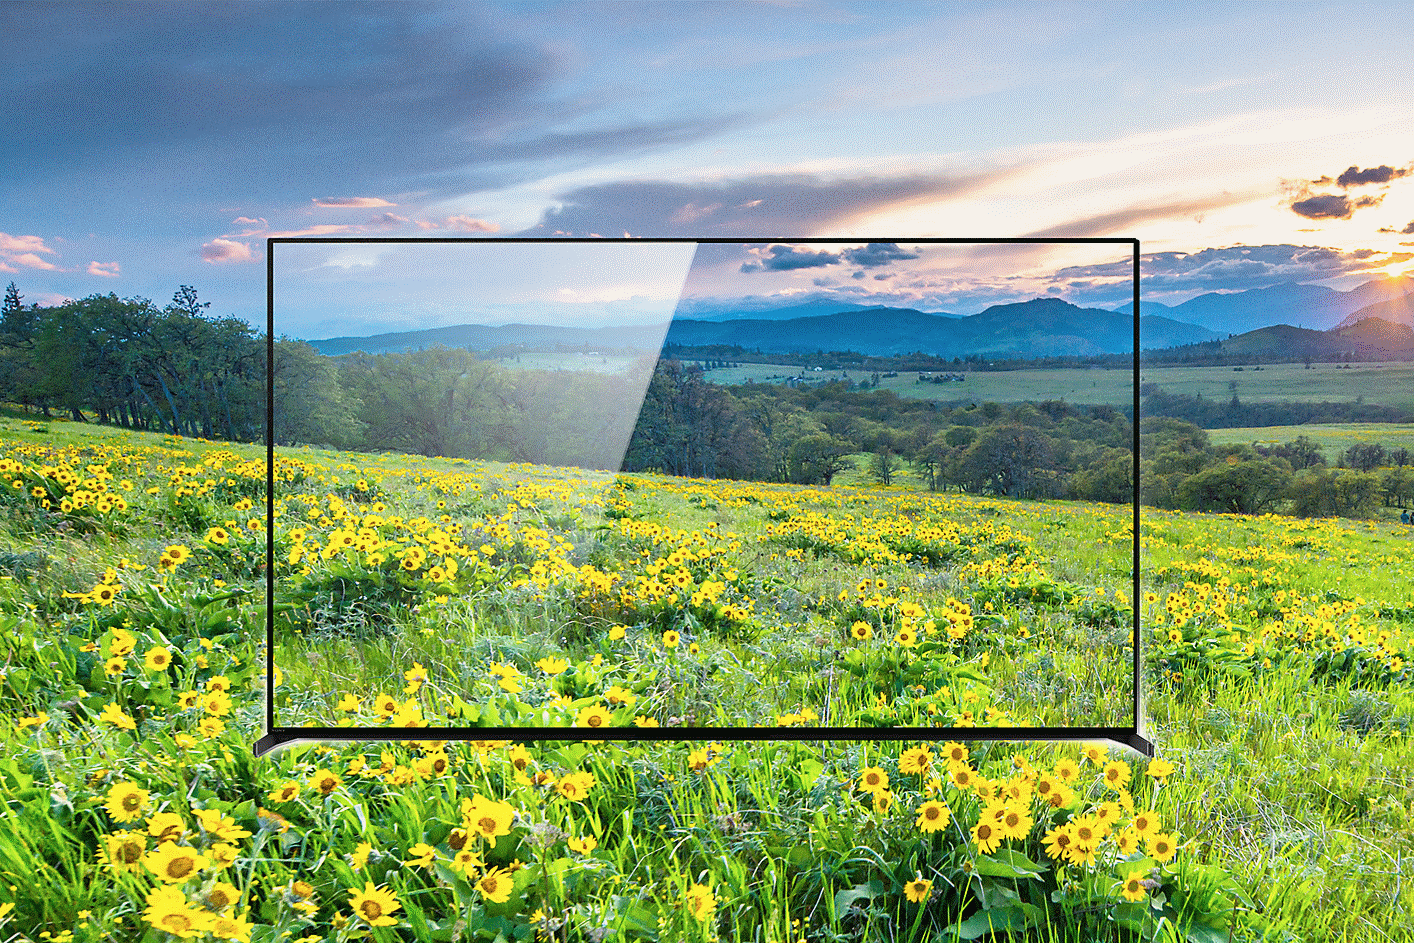 Meadow full of greenery and flowers and TV